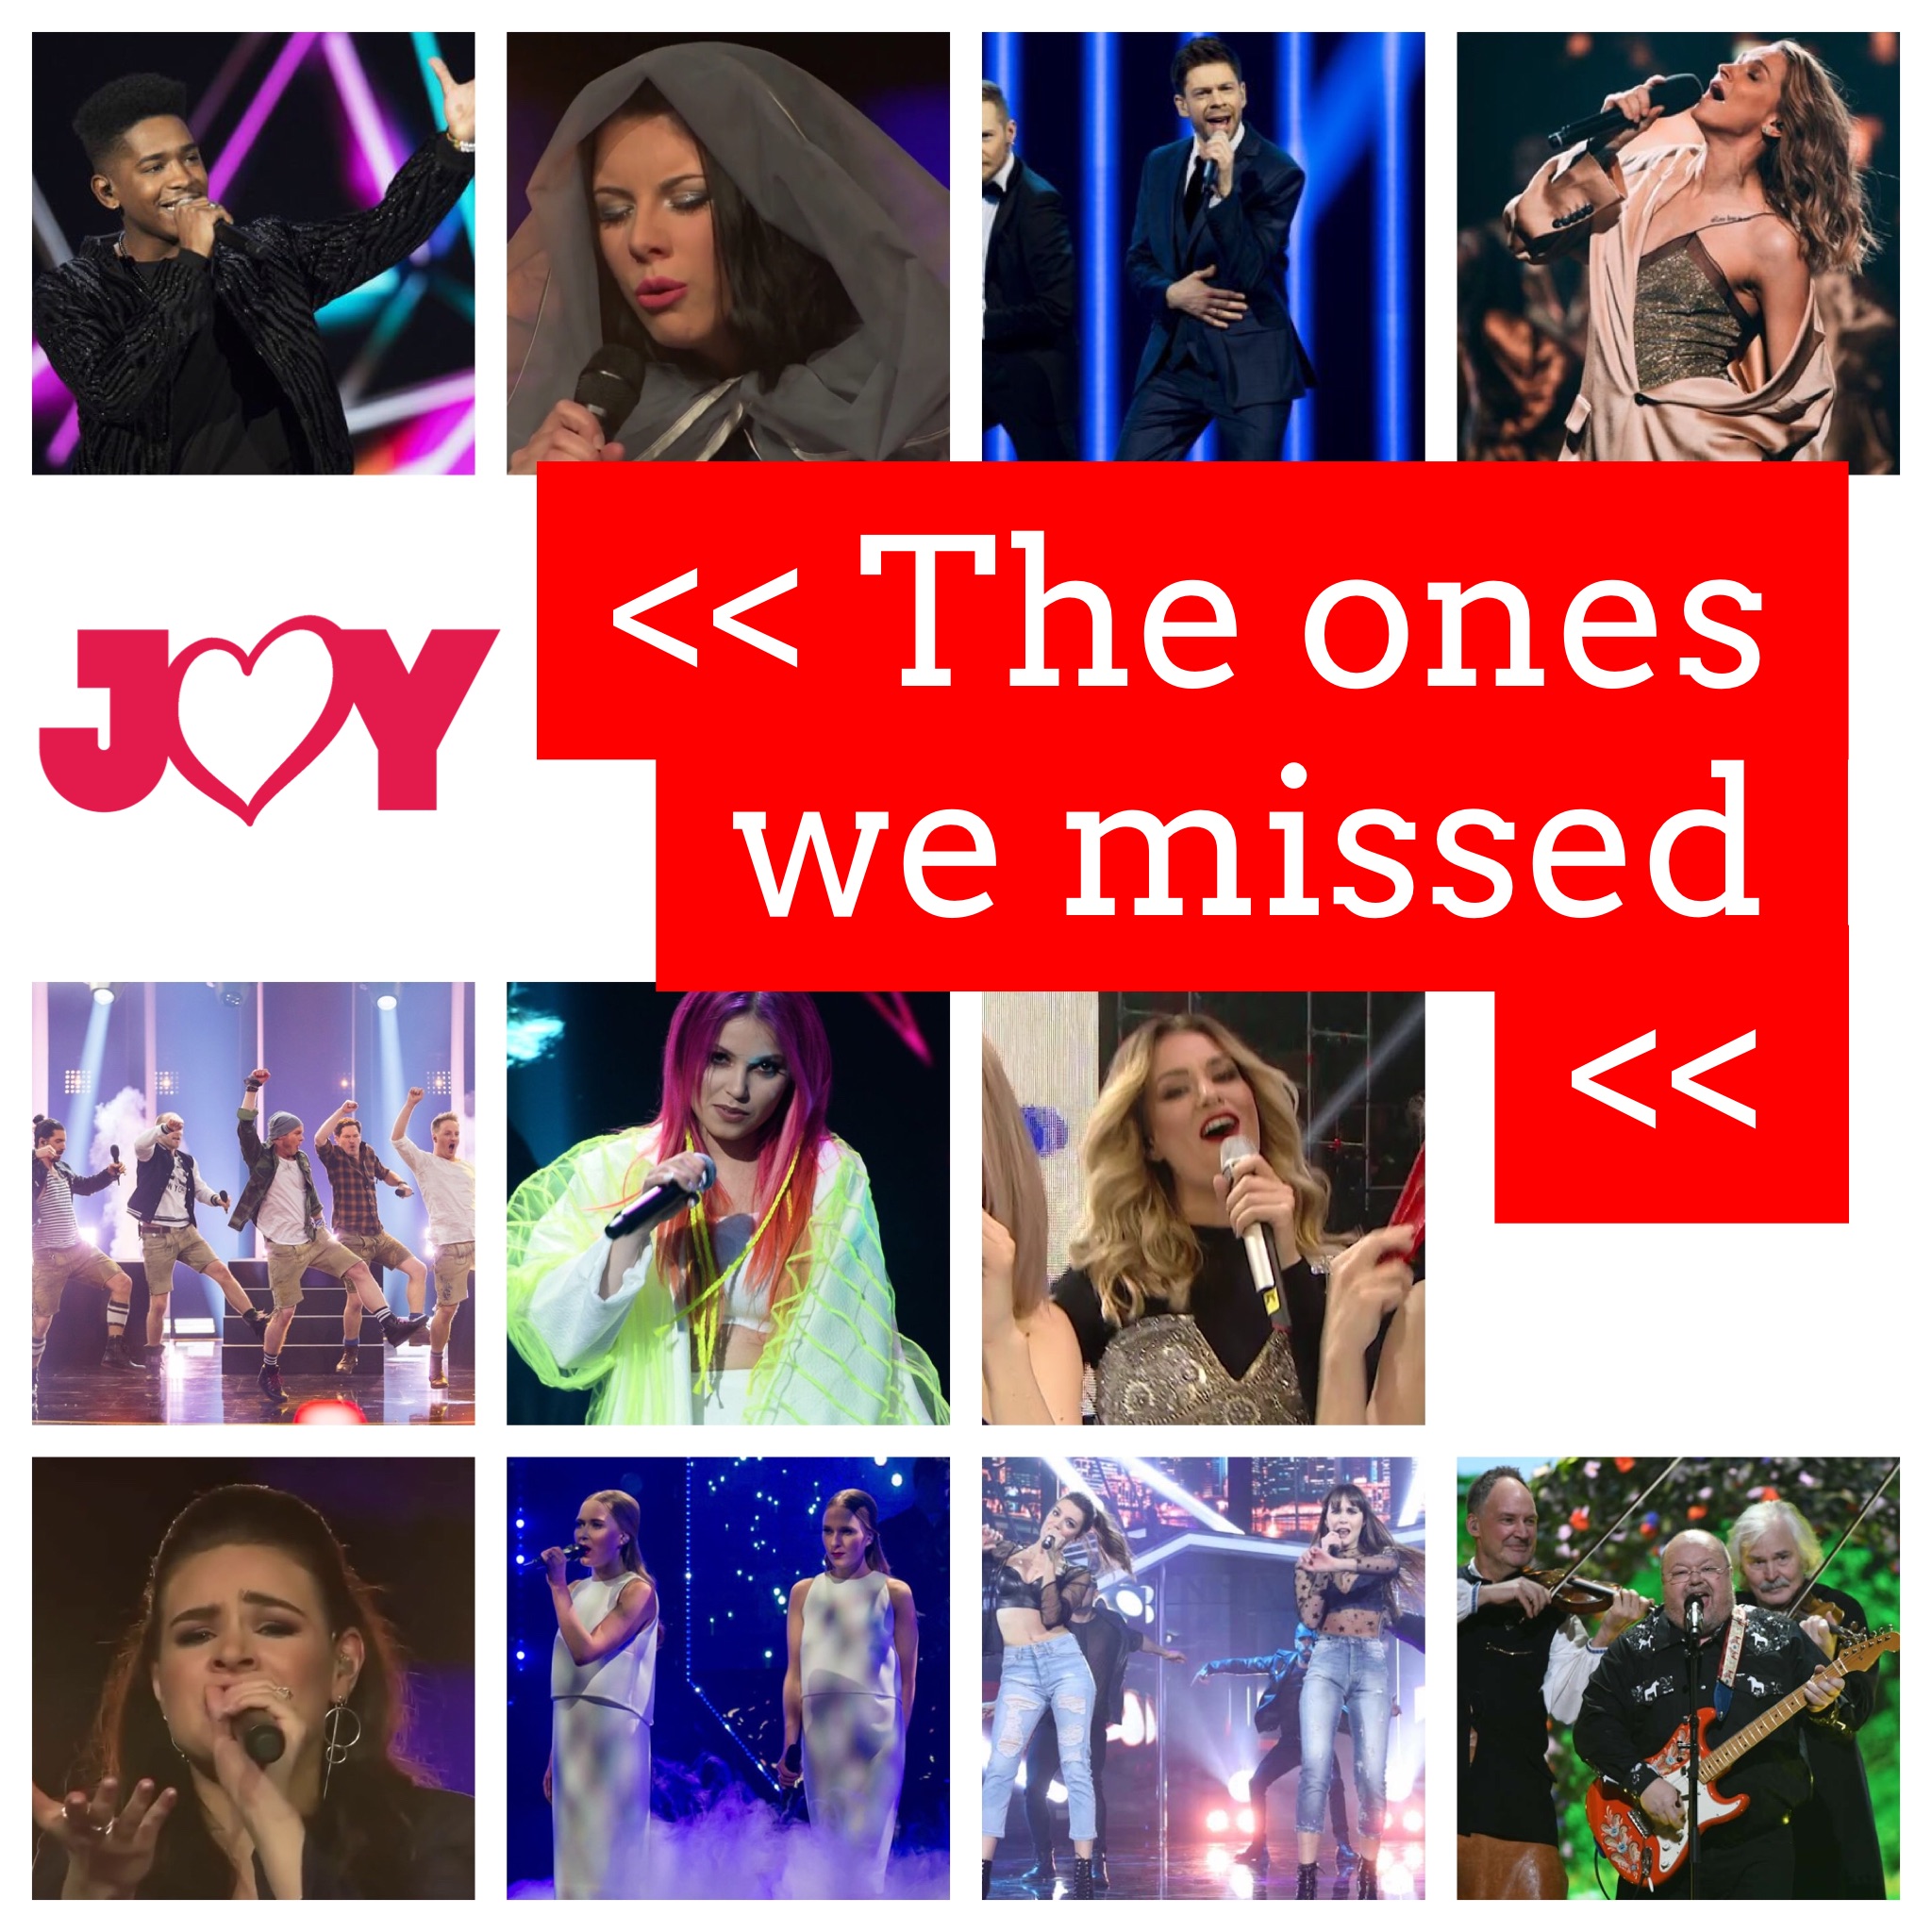 Your song is important to us: Recapping those we missed